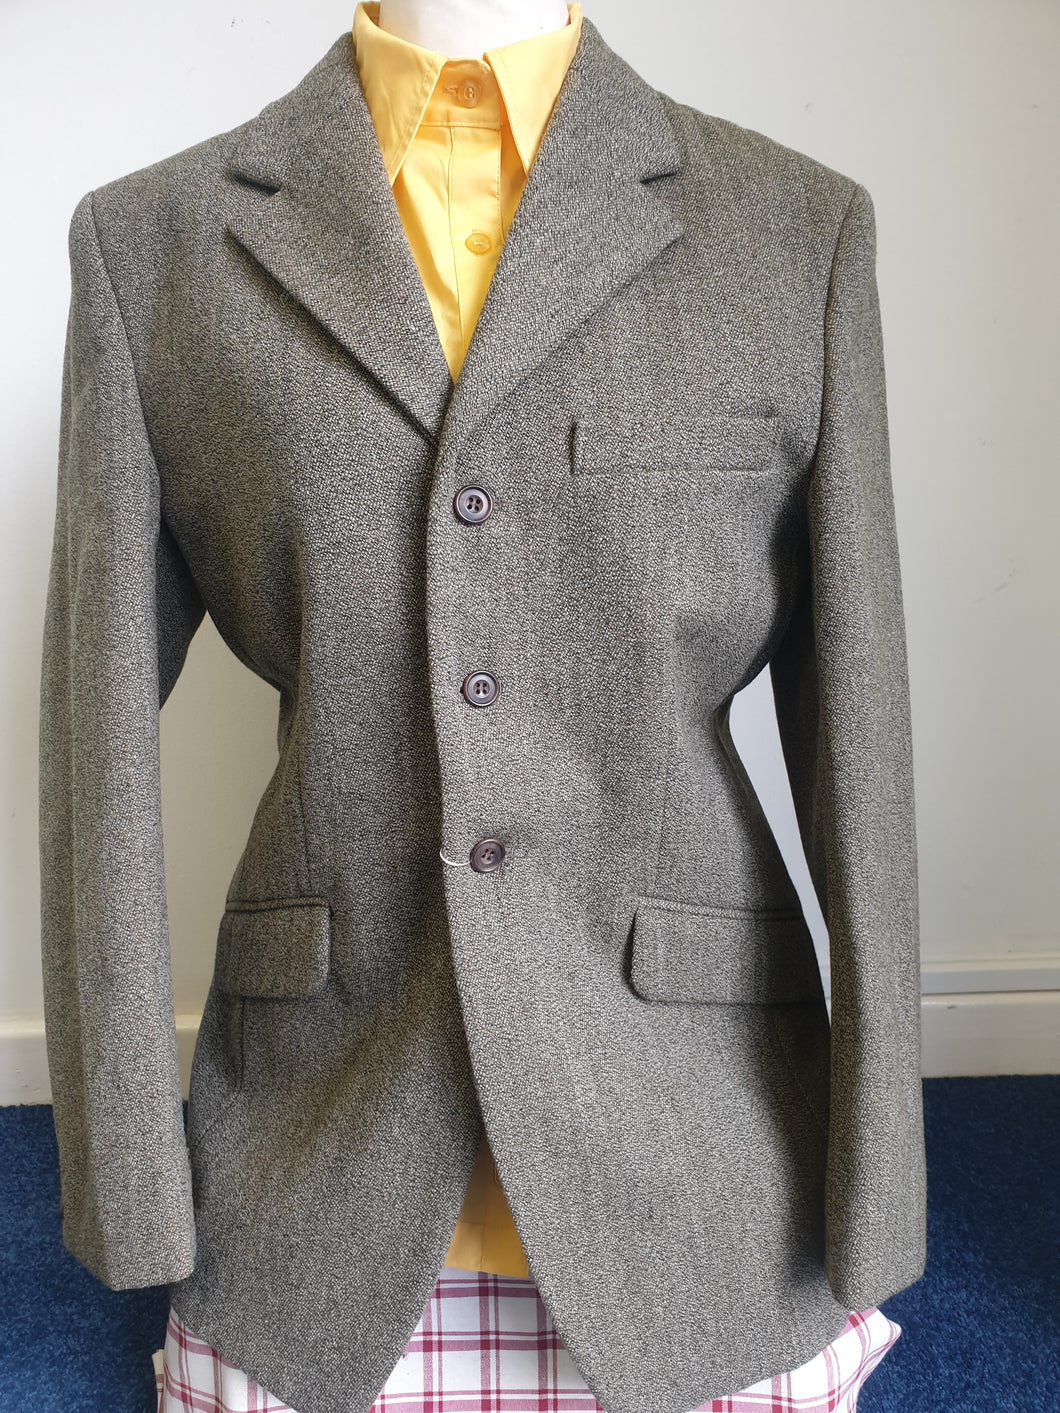 NEW mears keepers tweed jacket, size 16 (40